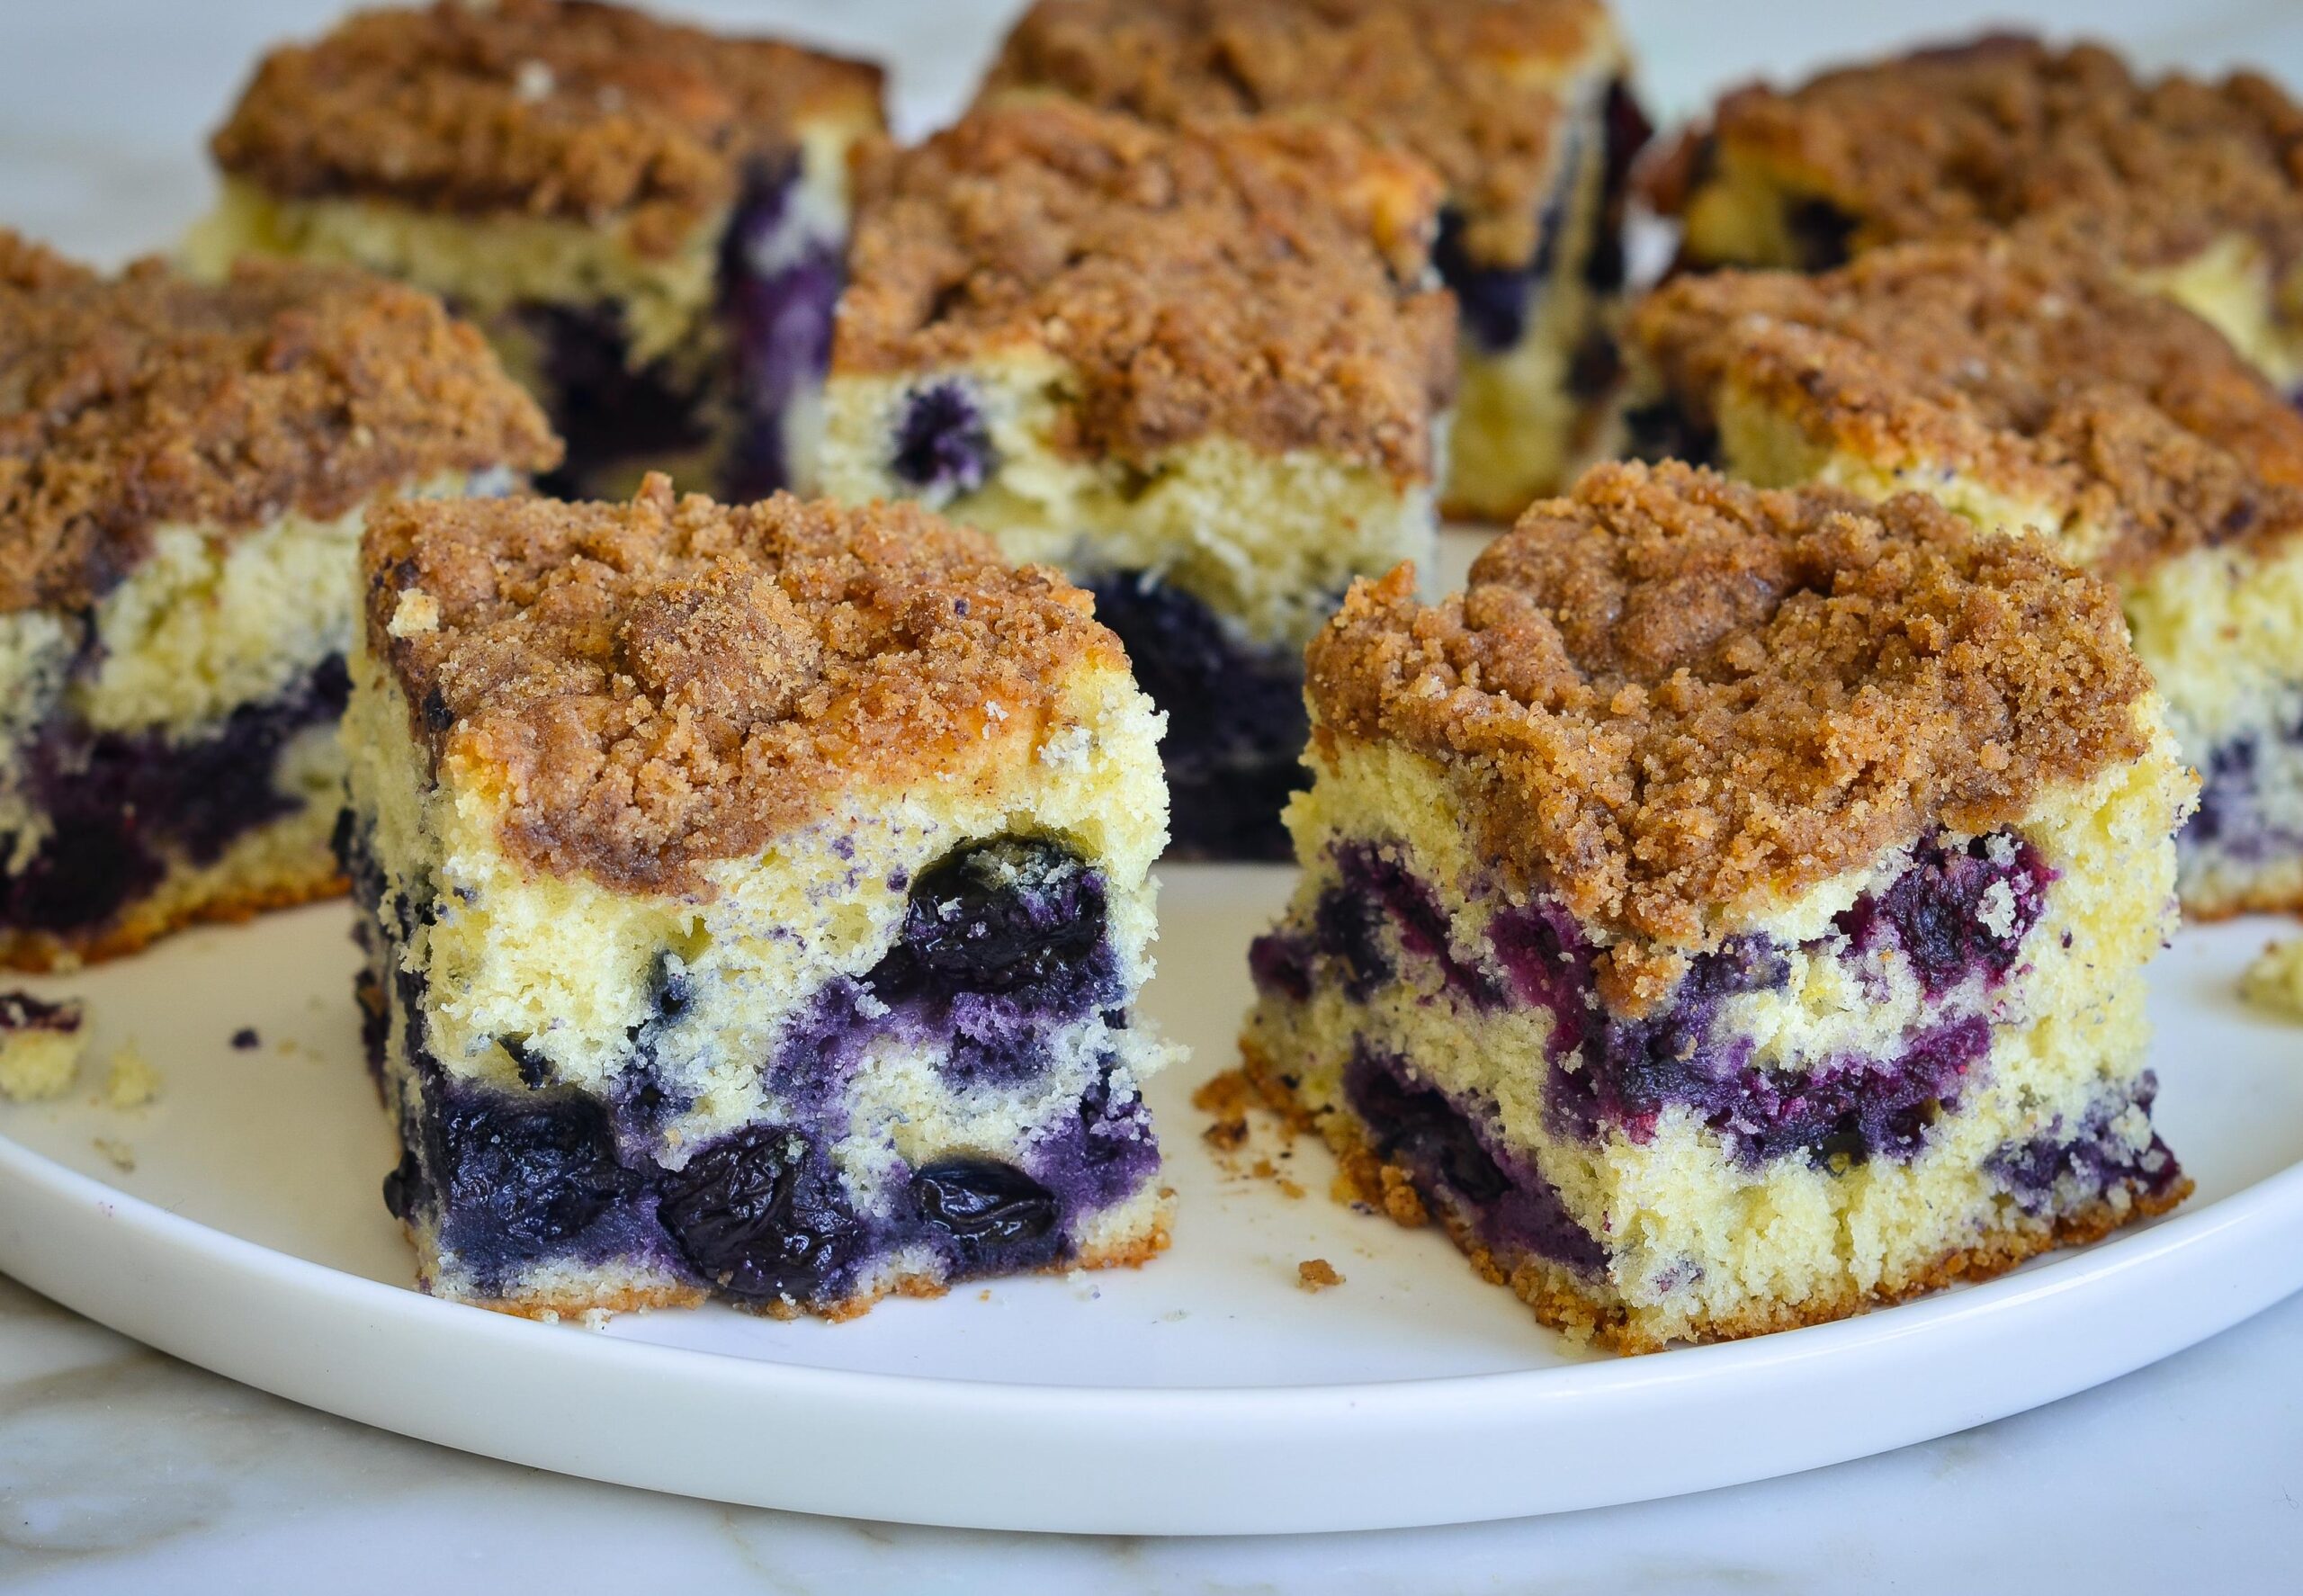  Start your day with a slice of blueberry bliss! 🍽️